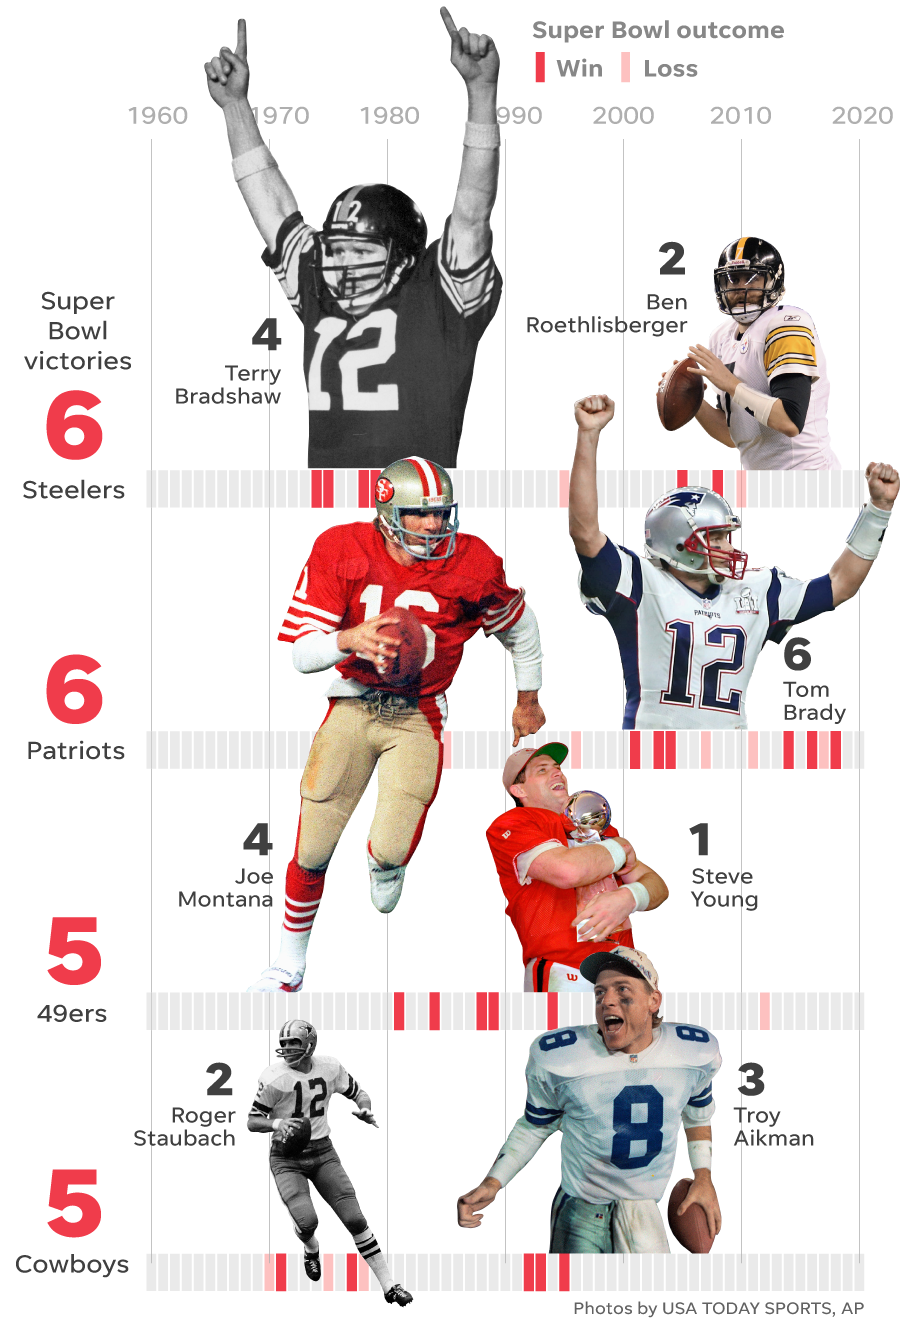 Super Bowl: 10 ways to visualize matchup between Chiefs and 49ers